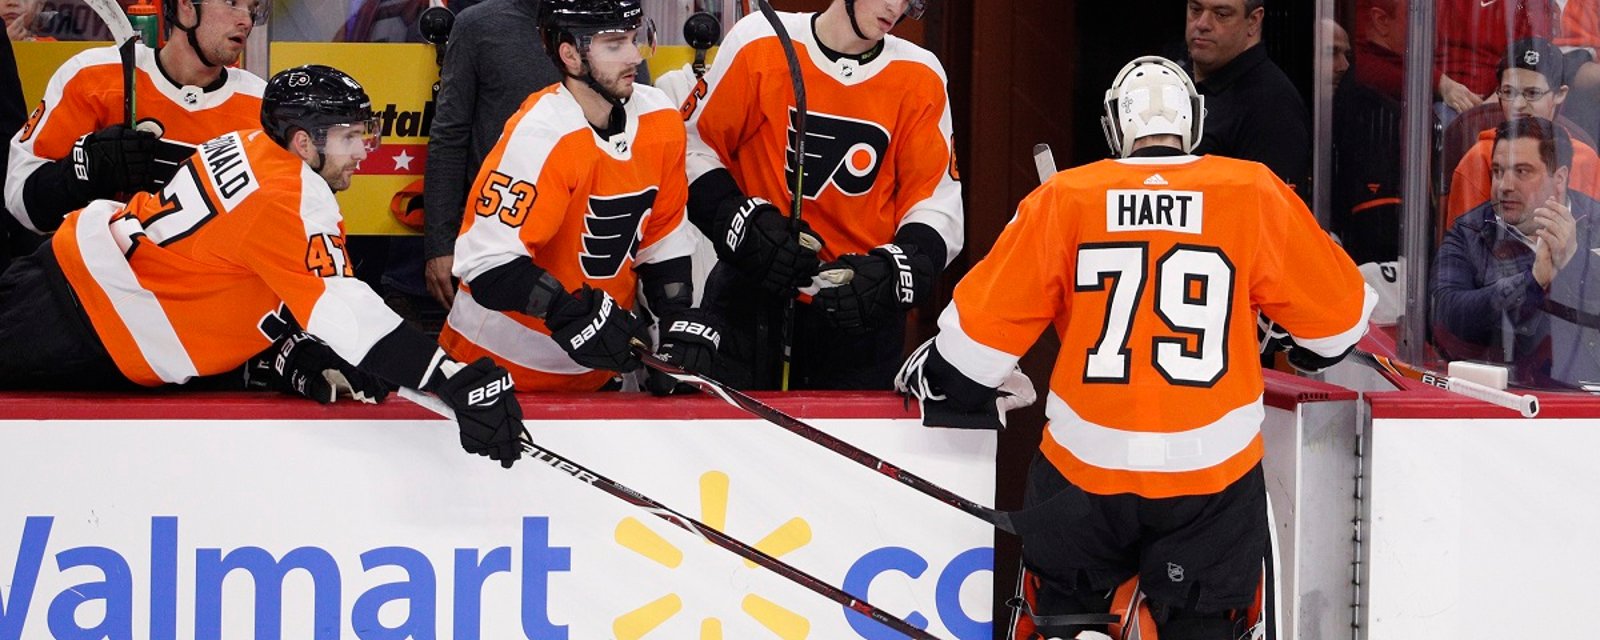 Breaking: Bad news for young Flyers star Carter Hart.